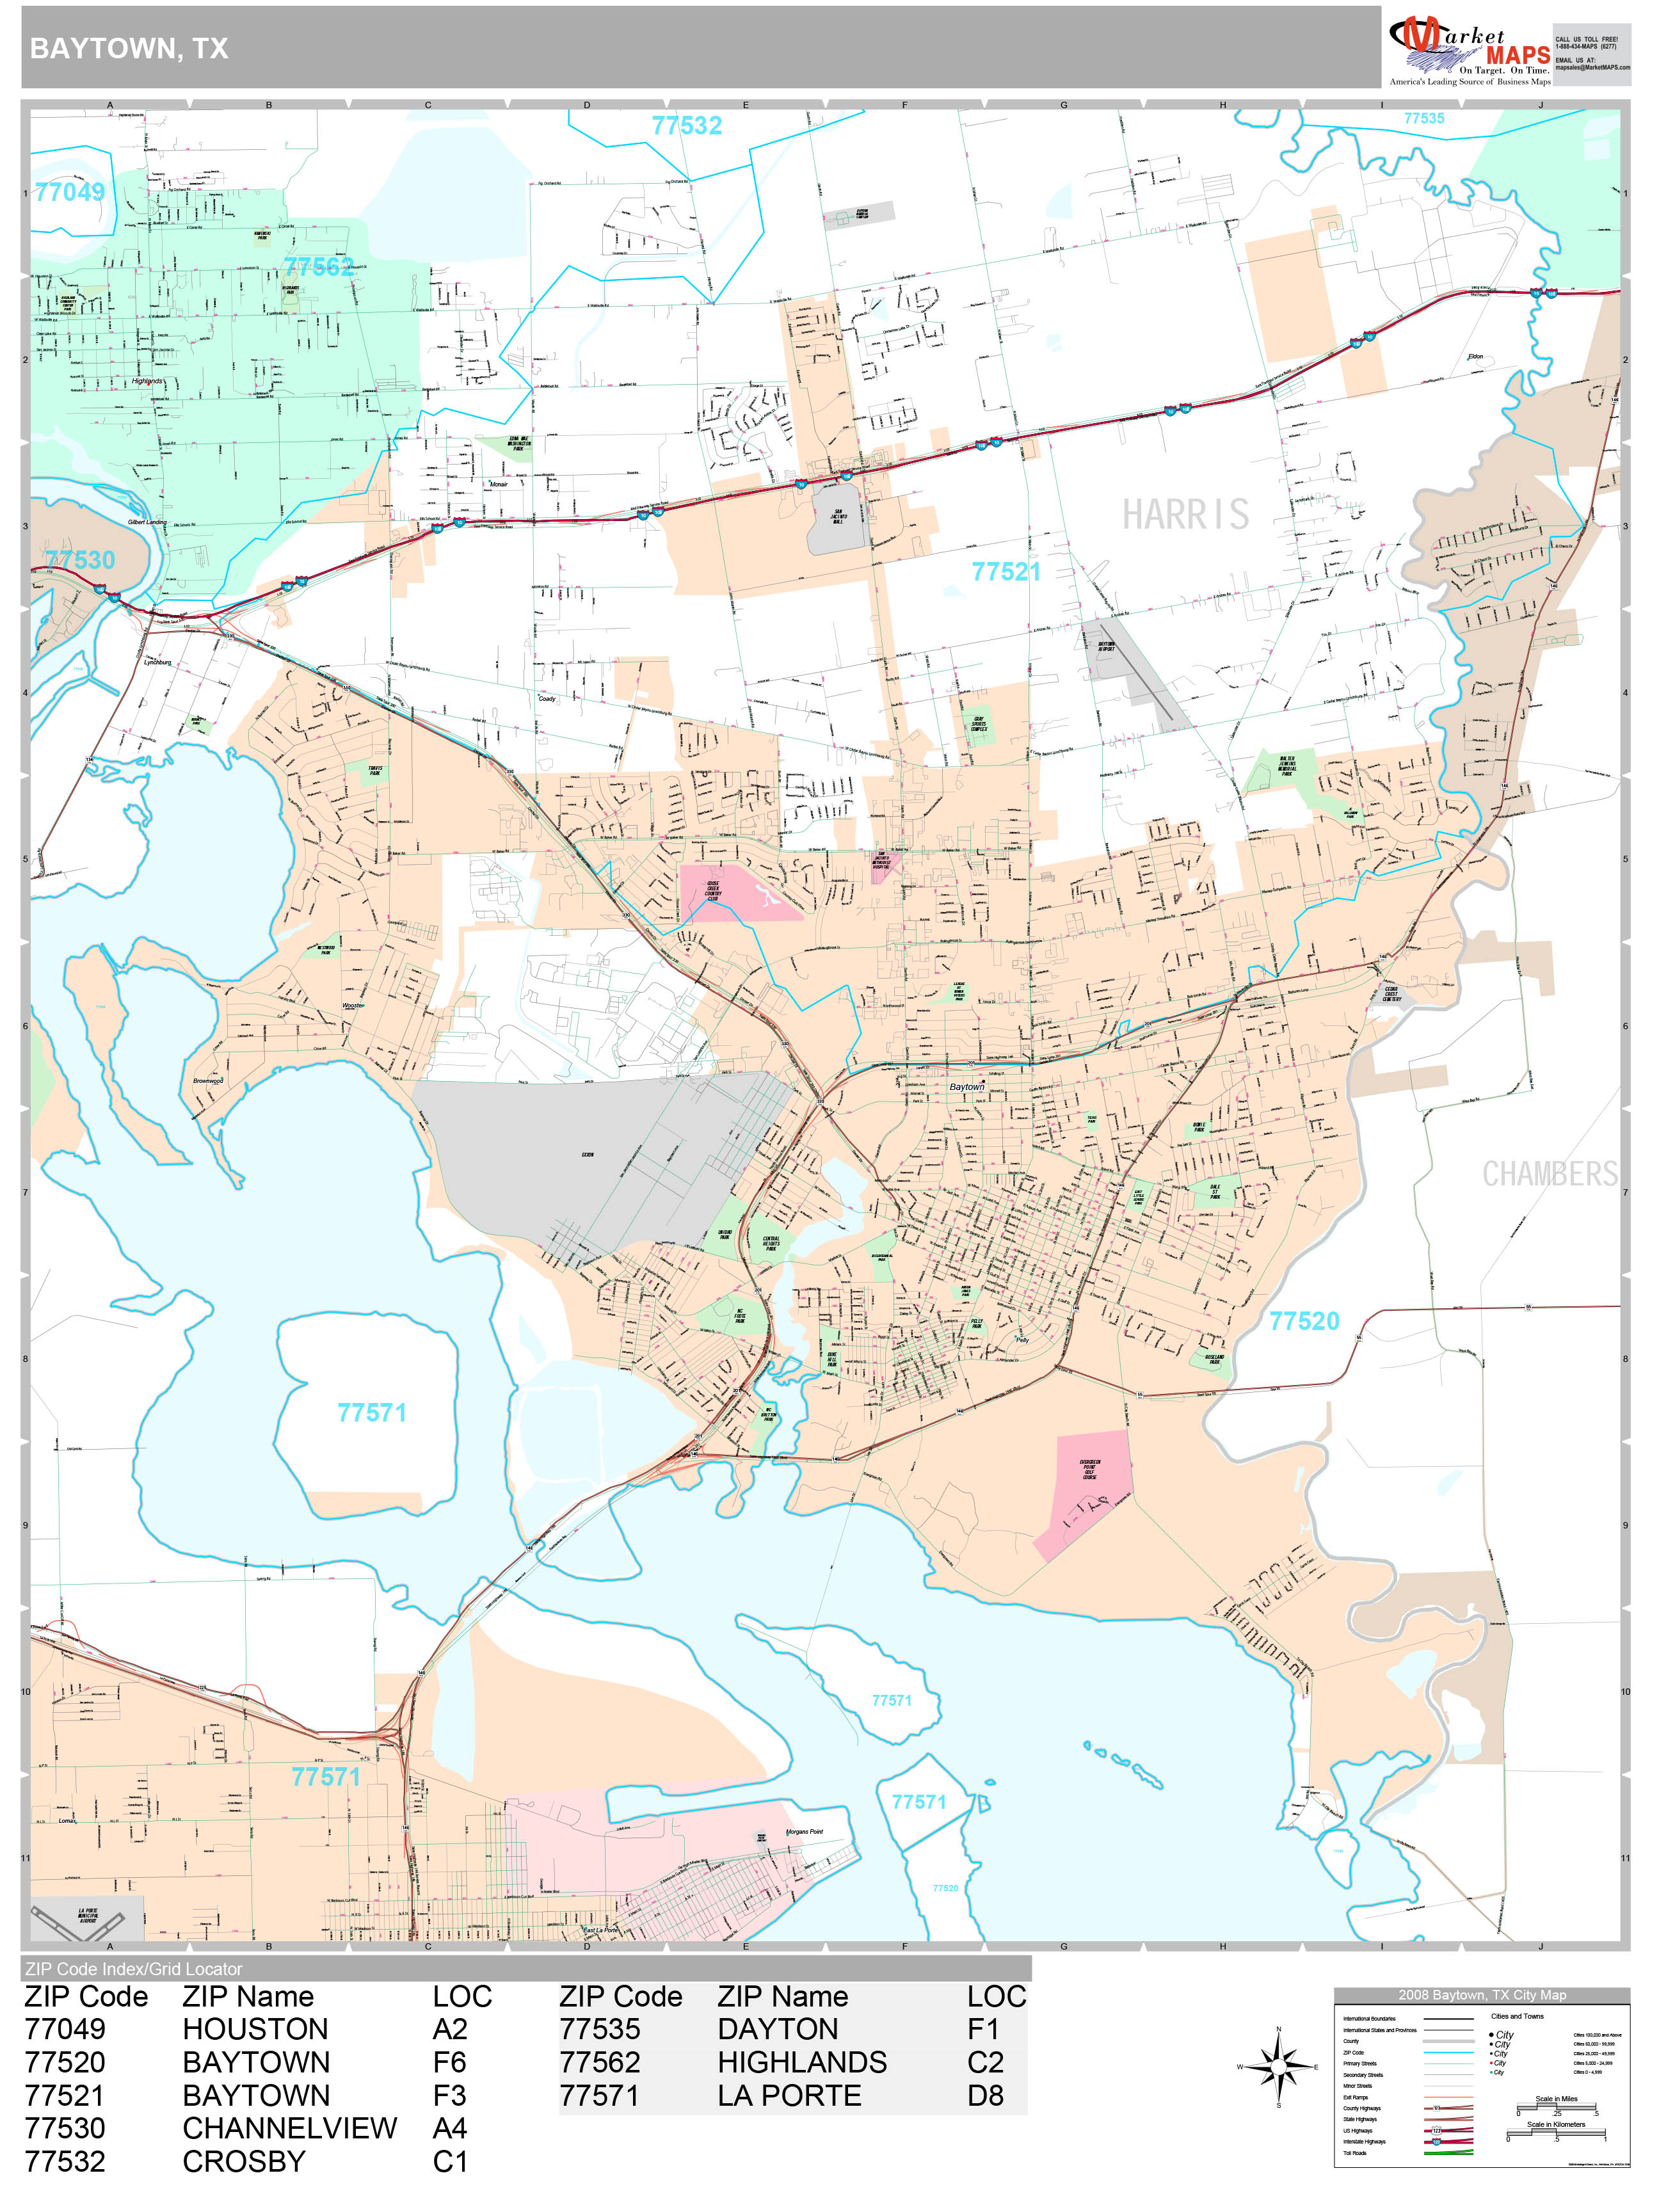 Baytown Texas Wall Map Color Cast Style By Marketmaps | Images and ...